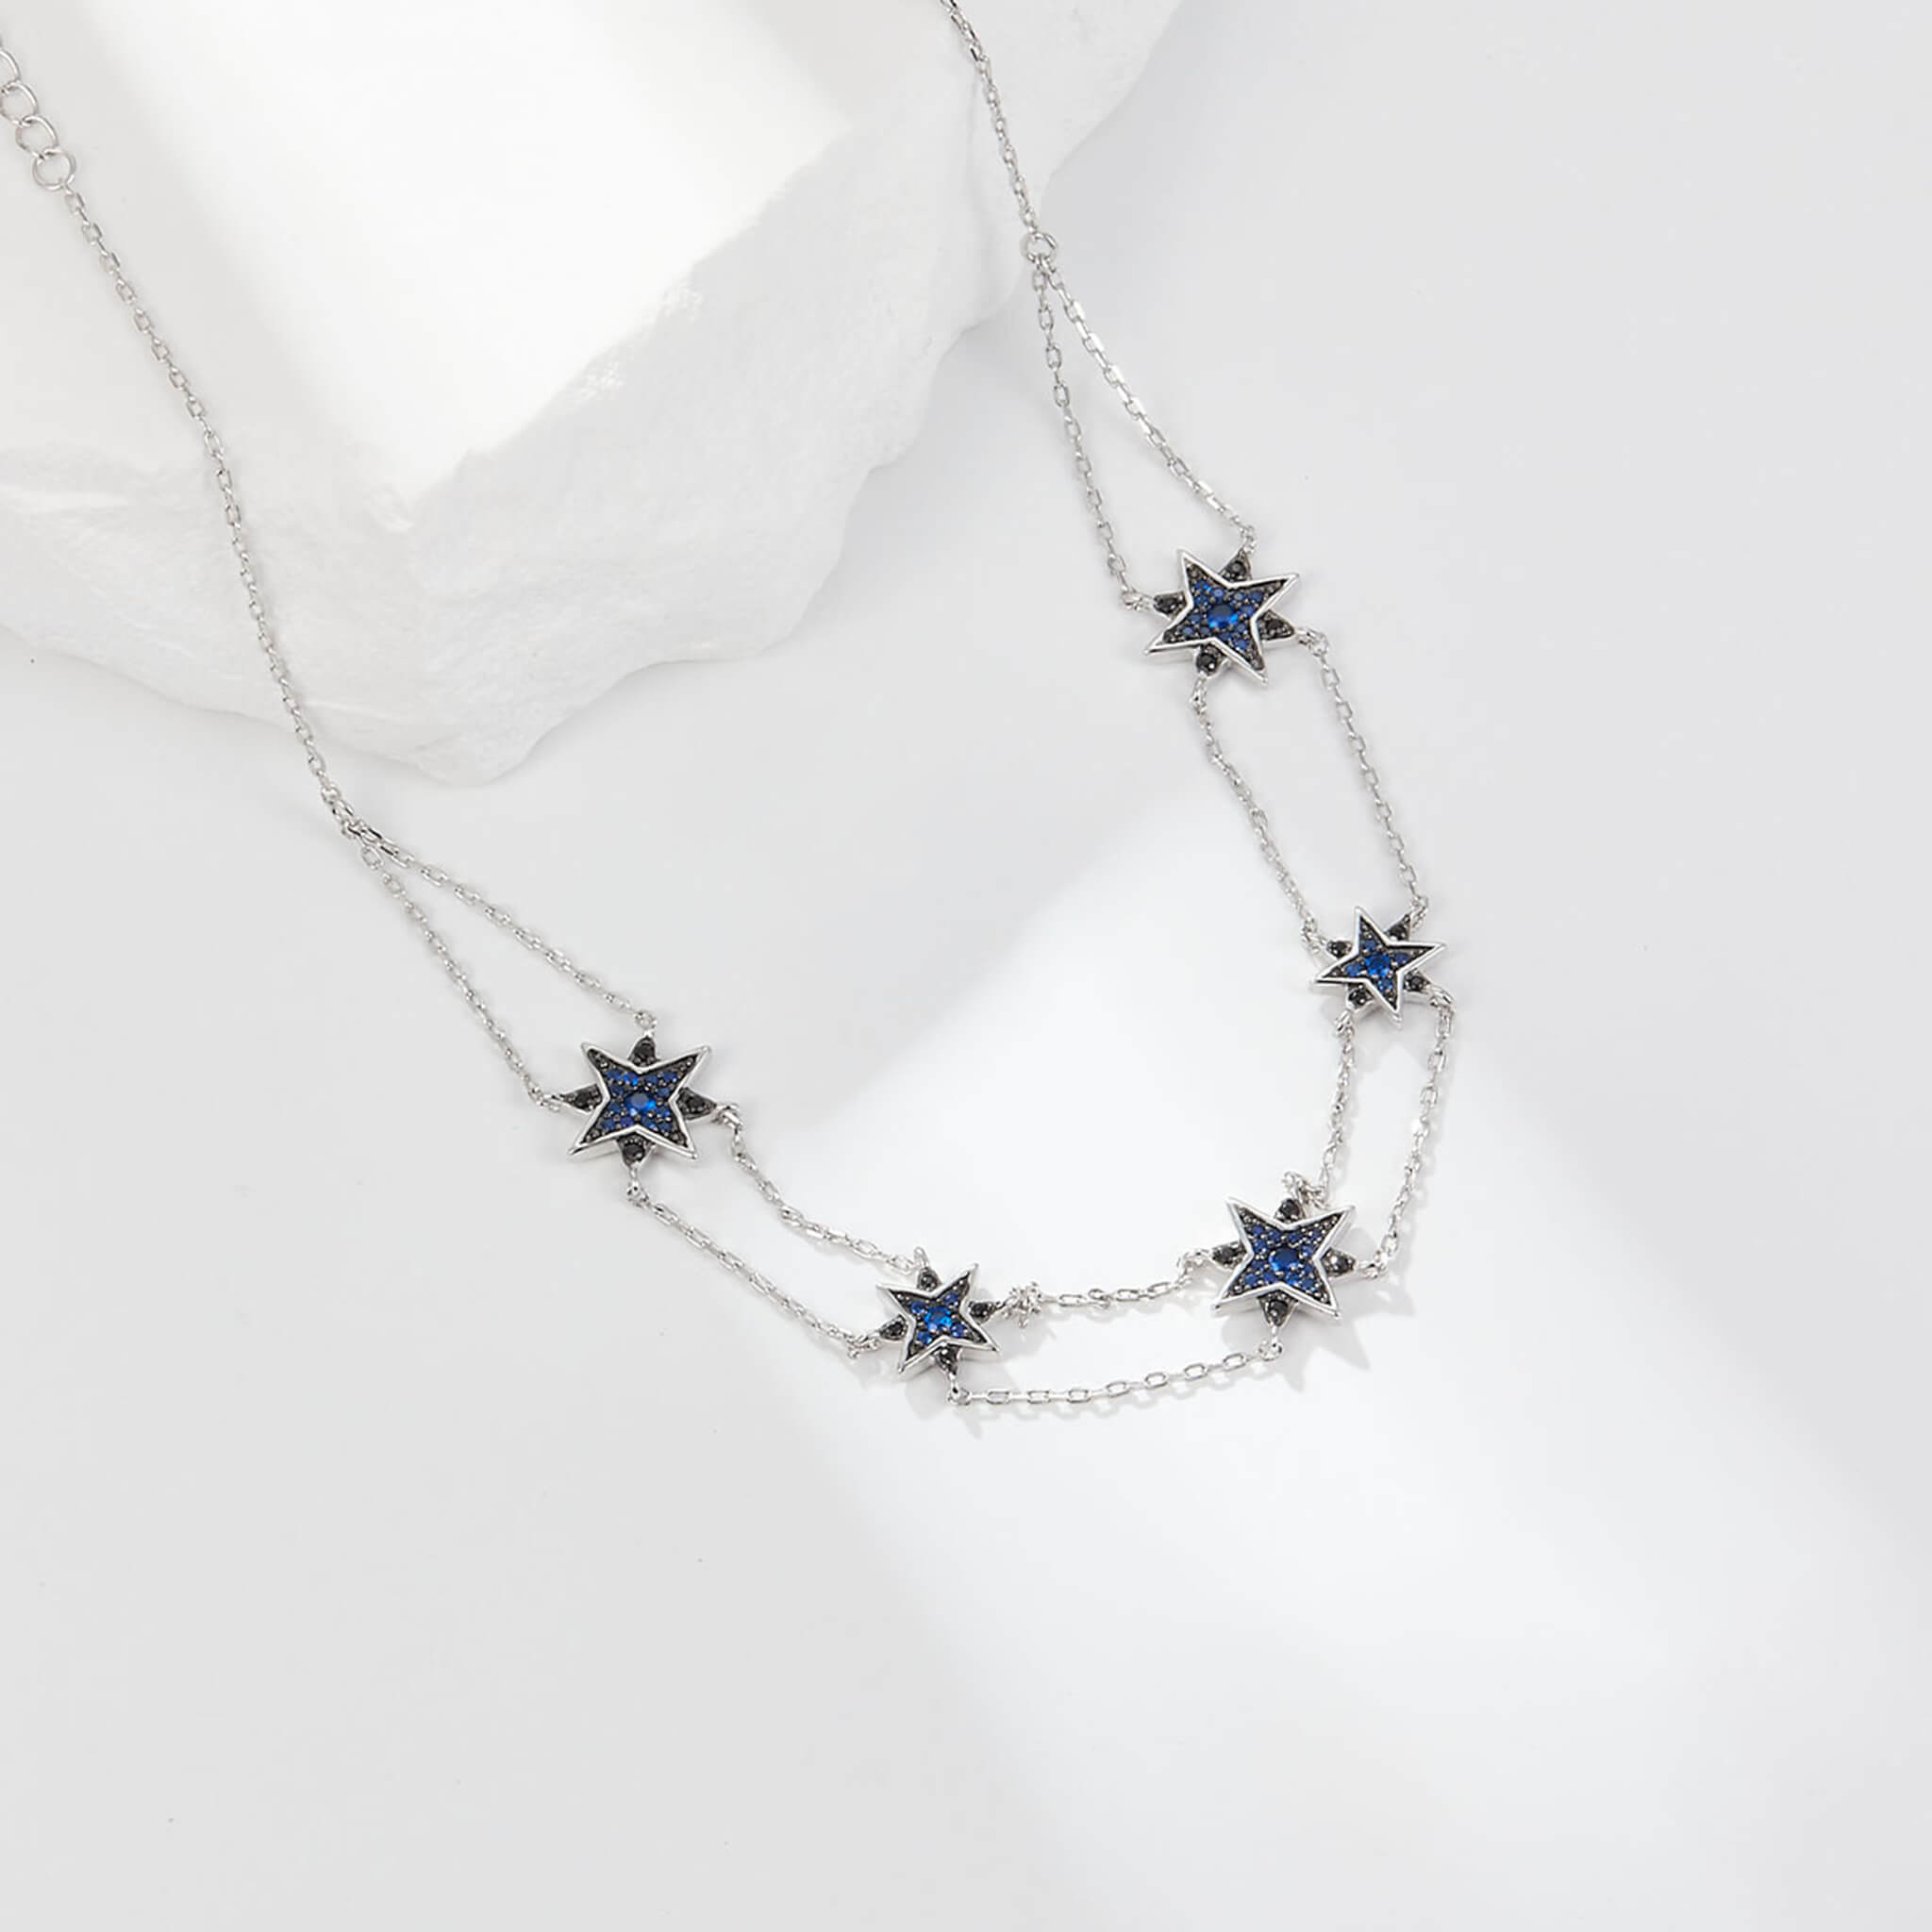 S925 Silver Snowflake Blue Crystal Earrings Necklace Set  UponBasics Necklace Silver 